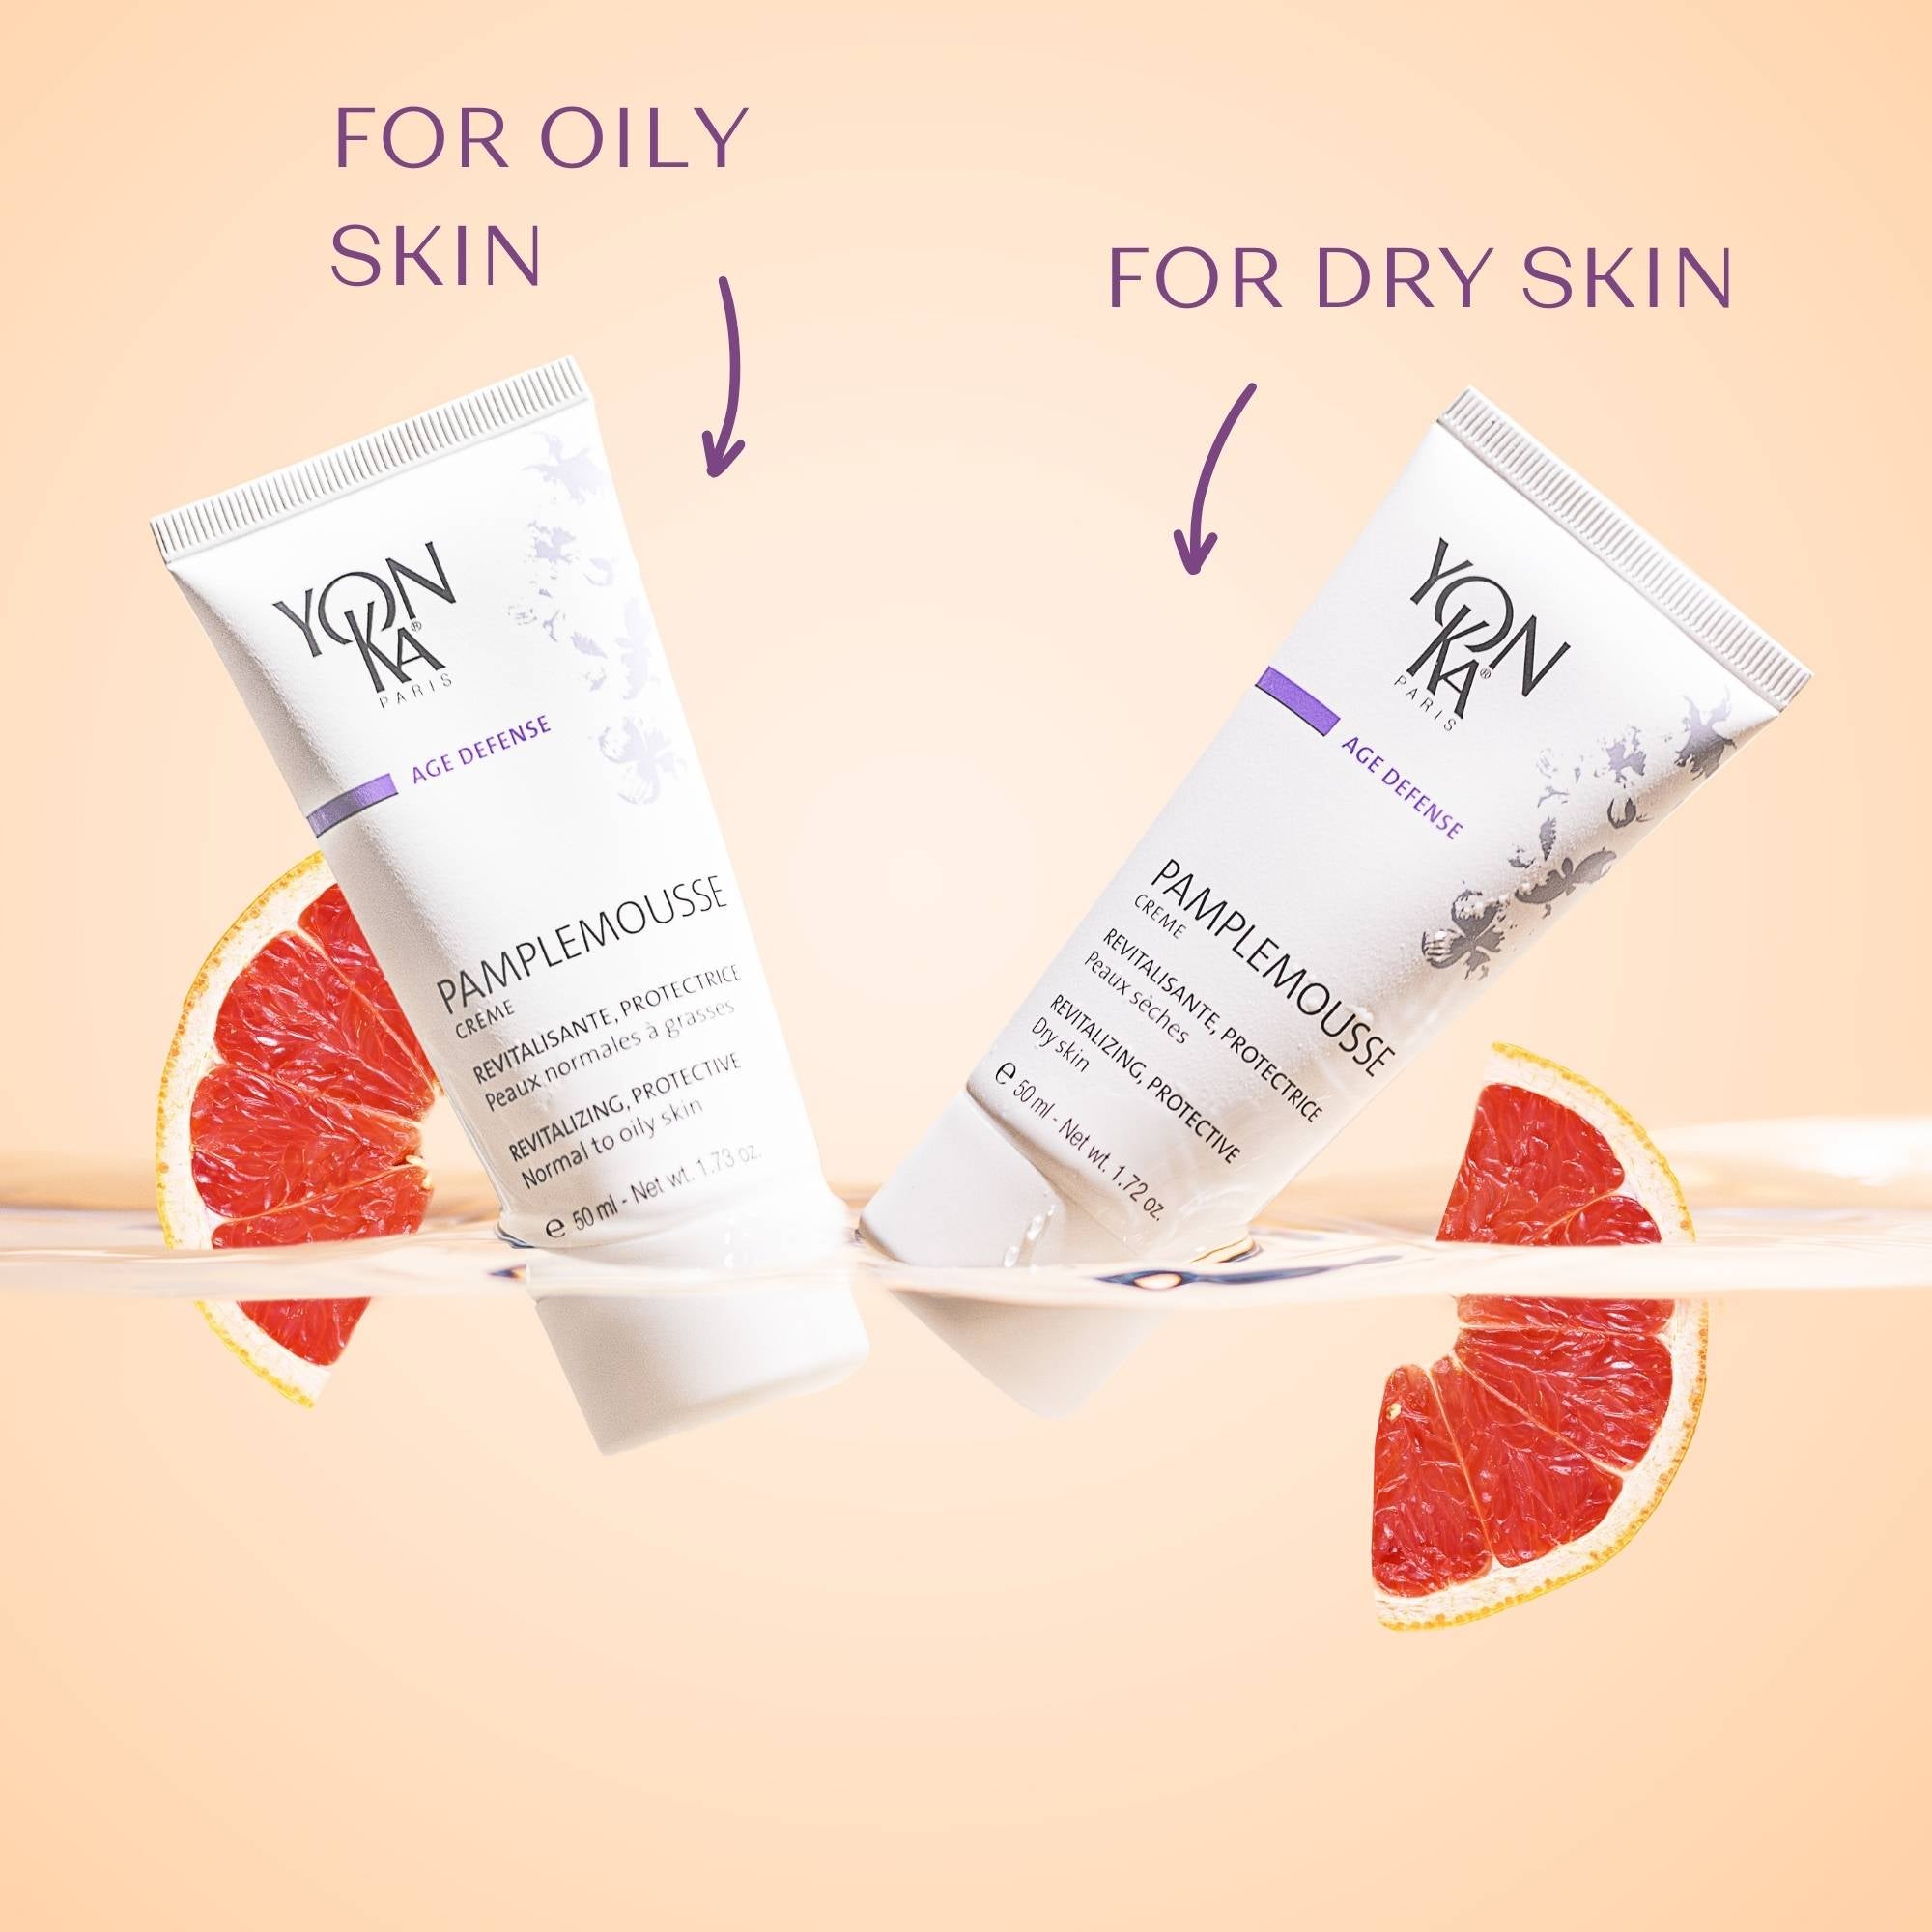 Pamplemousse Normal to Oily Skin